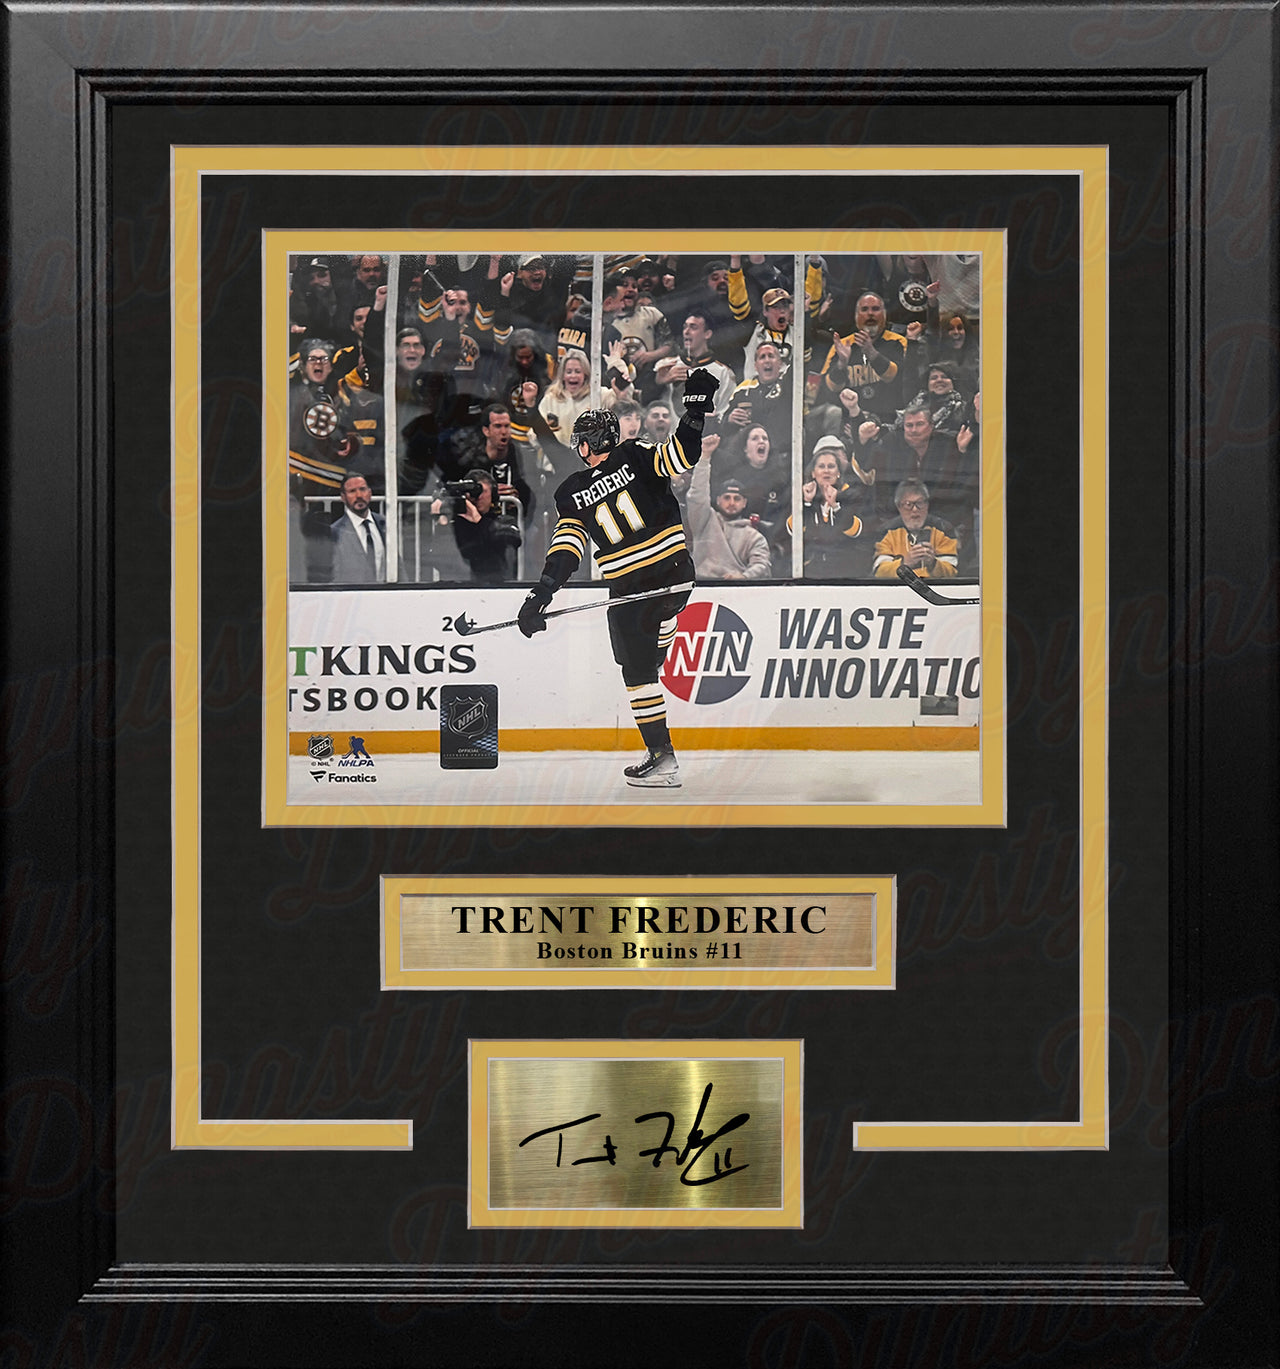 Trent Frederic Goal Celebration Boston Bruins 16" x 20" Framed Hockey Photo with Engraved Autograph